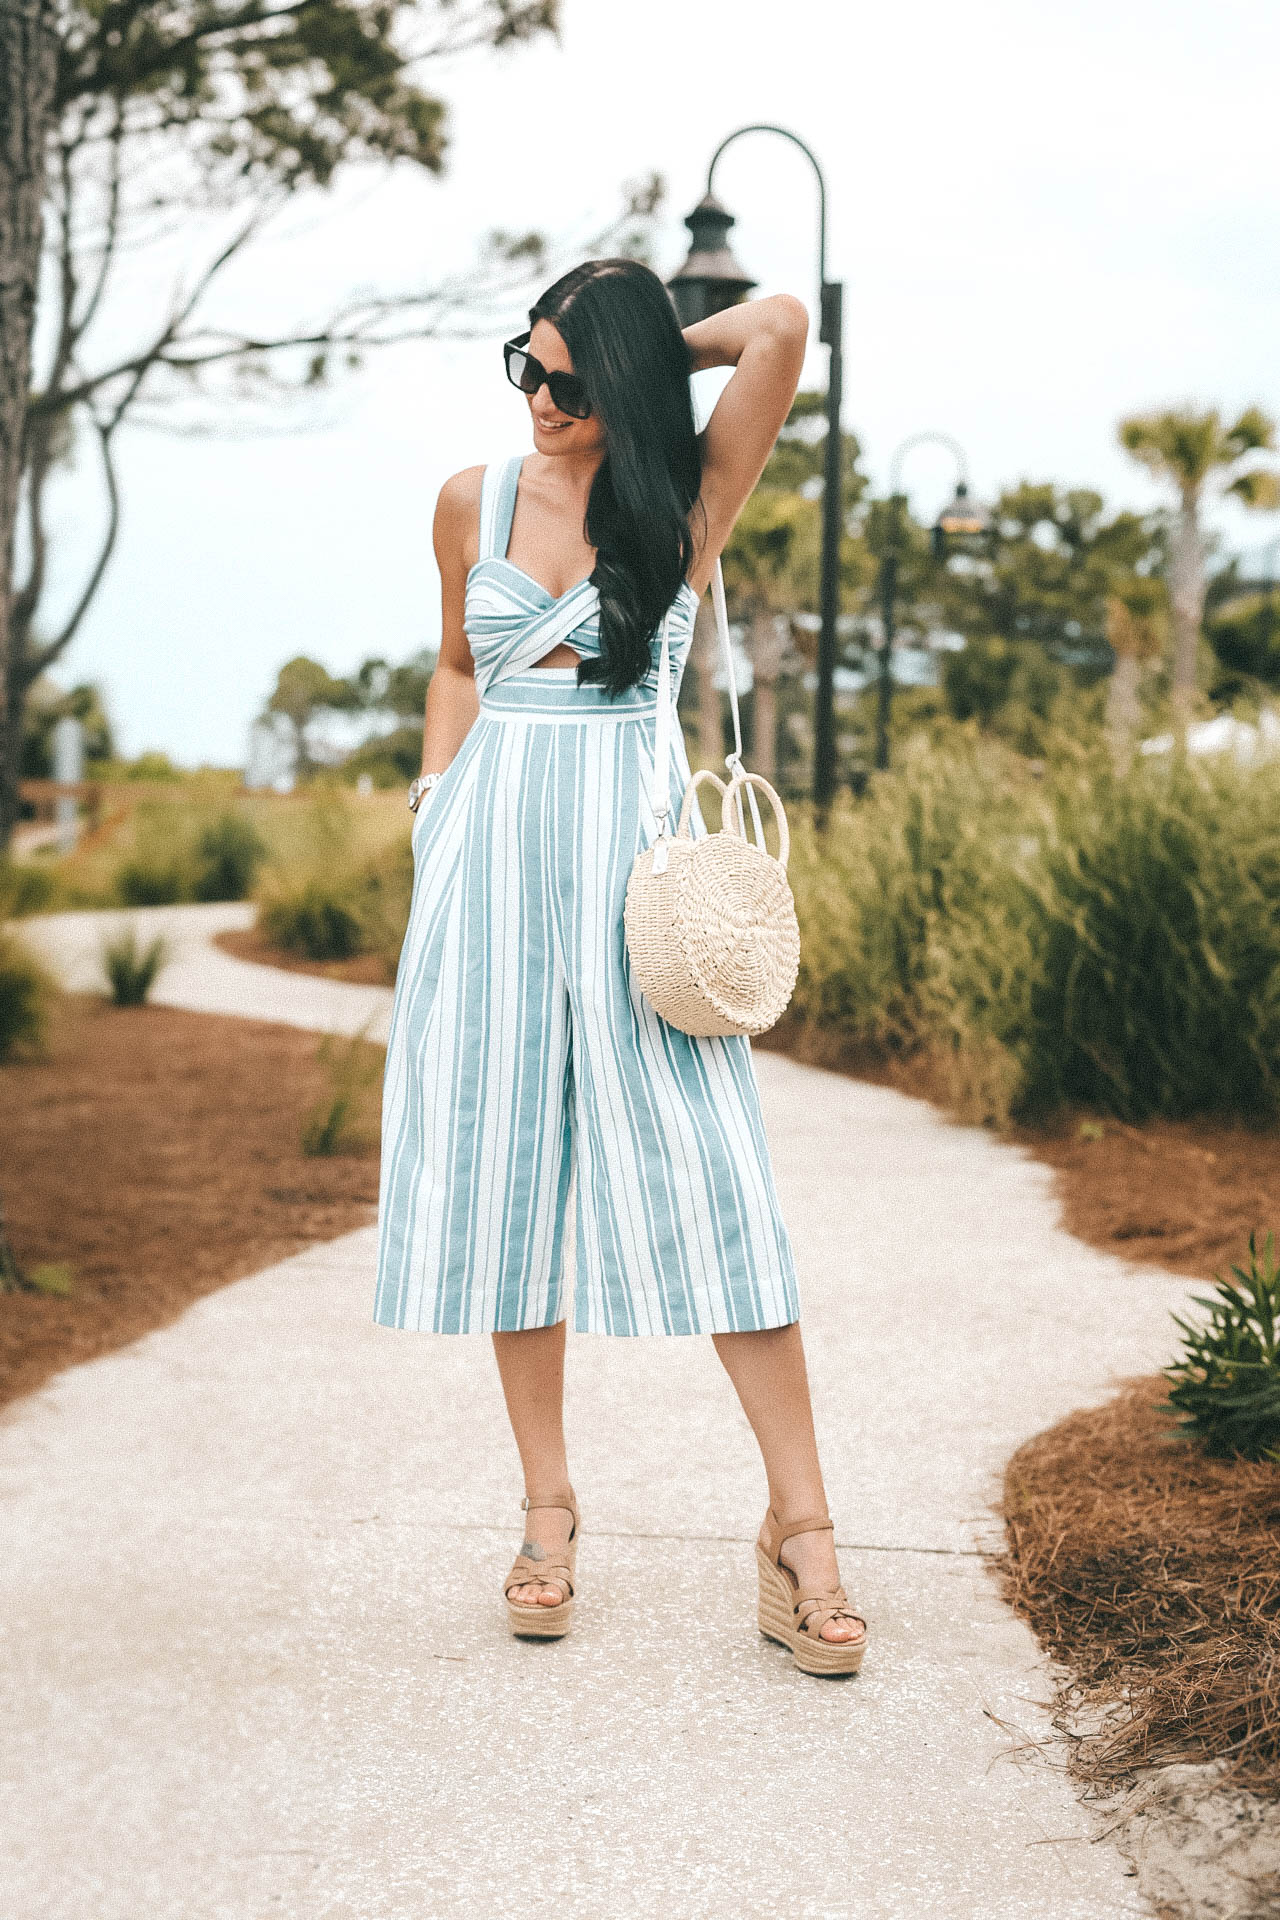 DTKAustin shares her must have romper/jumpsuit for summer from Red Dress Boutique that is under $100 | summer style | summer fashion | summer outfits | women's outfits | summer romper | summer jumpsuit | outfits under $100 || DTK Austin #summerstyle #summerfashion #summeroutfit #womensoutfit #summerjumpsuit #fashionunder100 #under100 #affordablestyle #dtkaustin